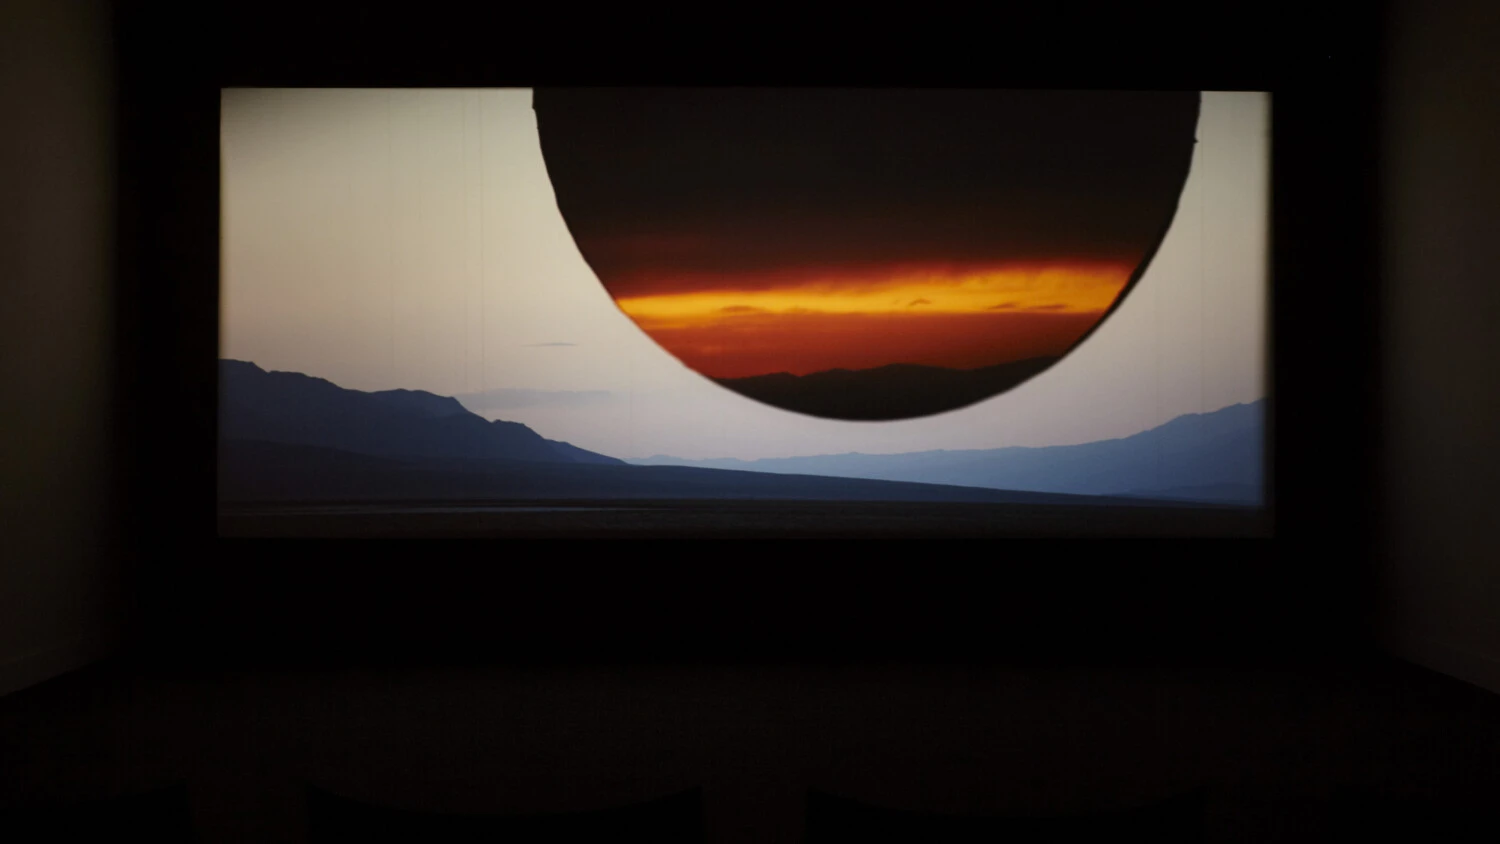 Tacita Dean, JG, 2013. Color and black & white anamorphic 35mm film with optical sound, 26.5 minutes. Courtesy of the artist and Frith Street Gallery, London/Marian Goodman Gallery, New York/Paris.